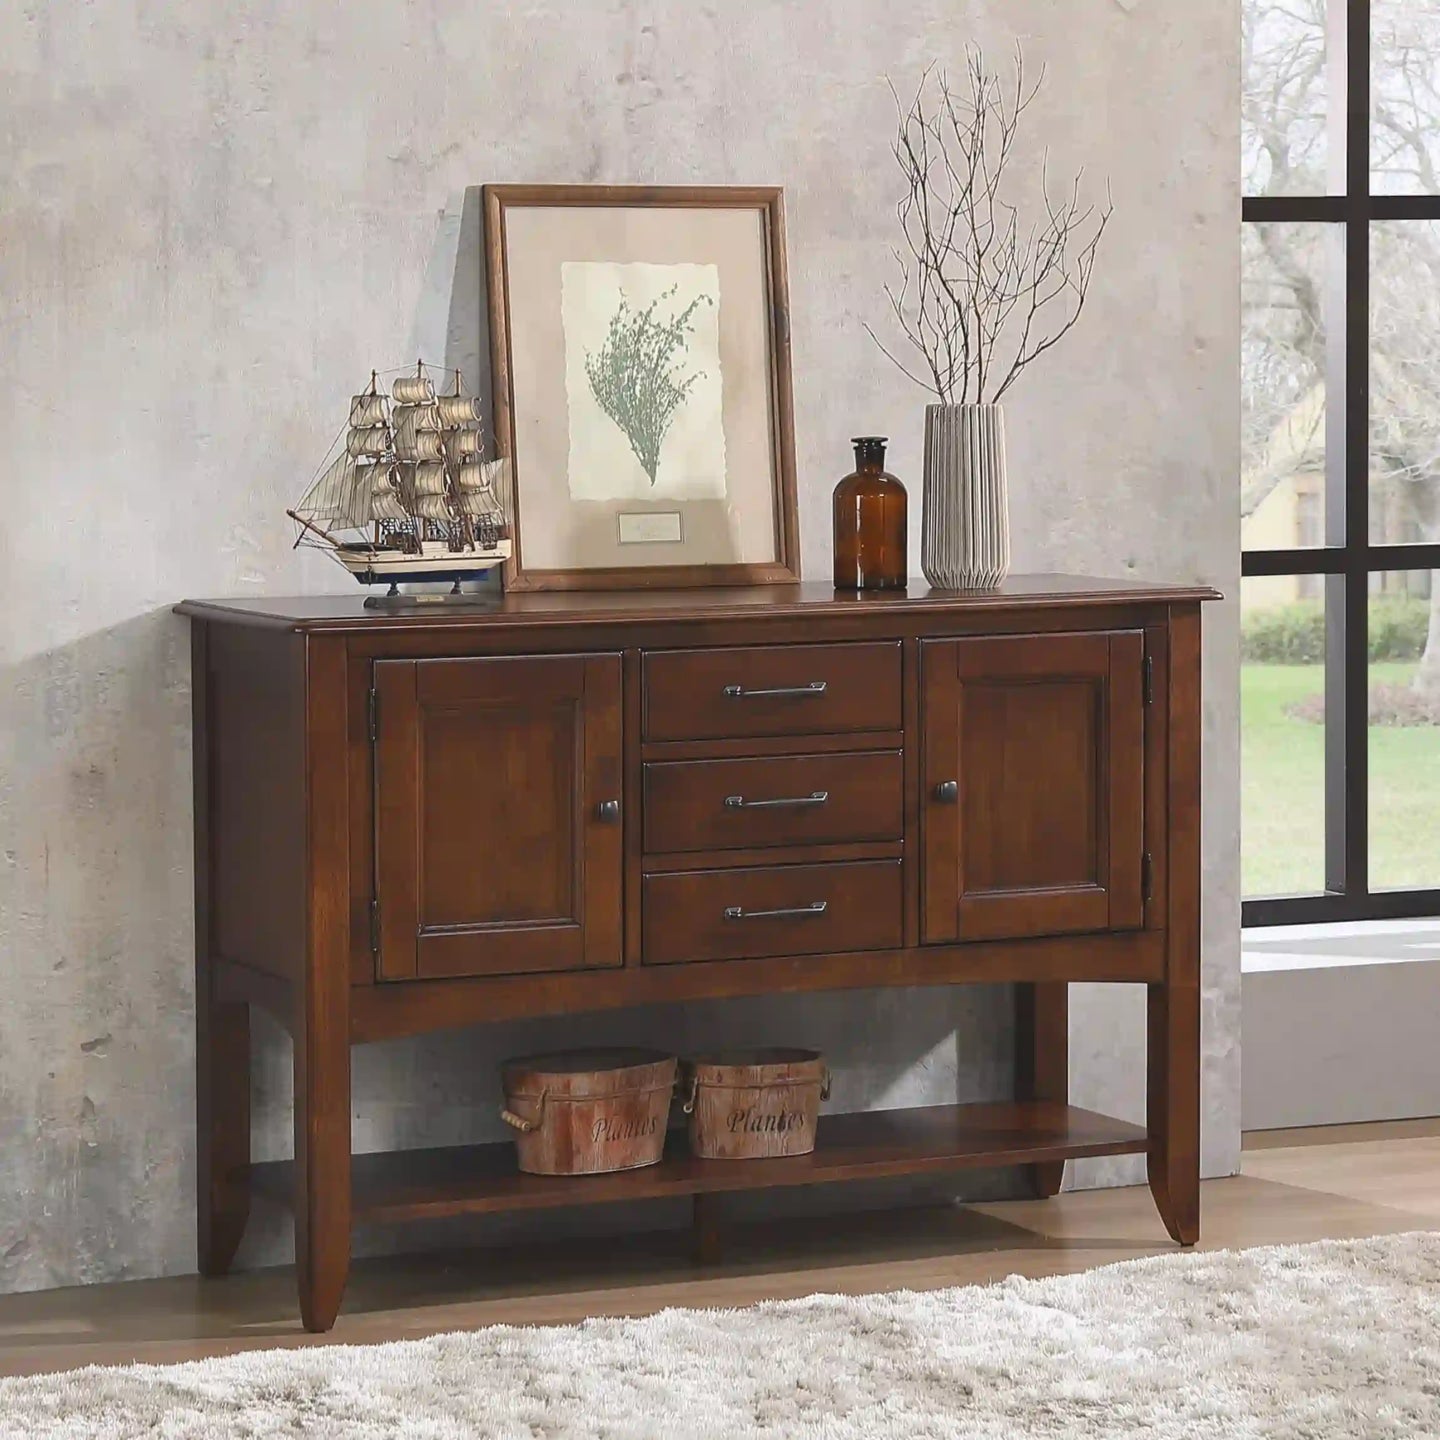 Sunset Trading Andrews Sideboard with Large Display Shelf | 3 Drawers 2 Storage Cabinets | Chestnut Brown